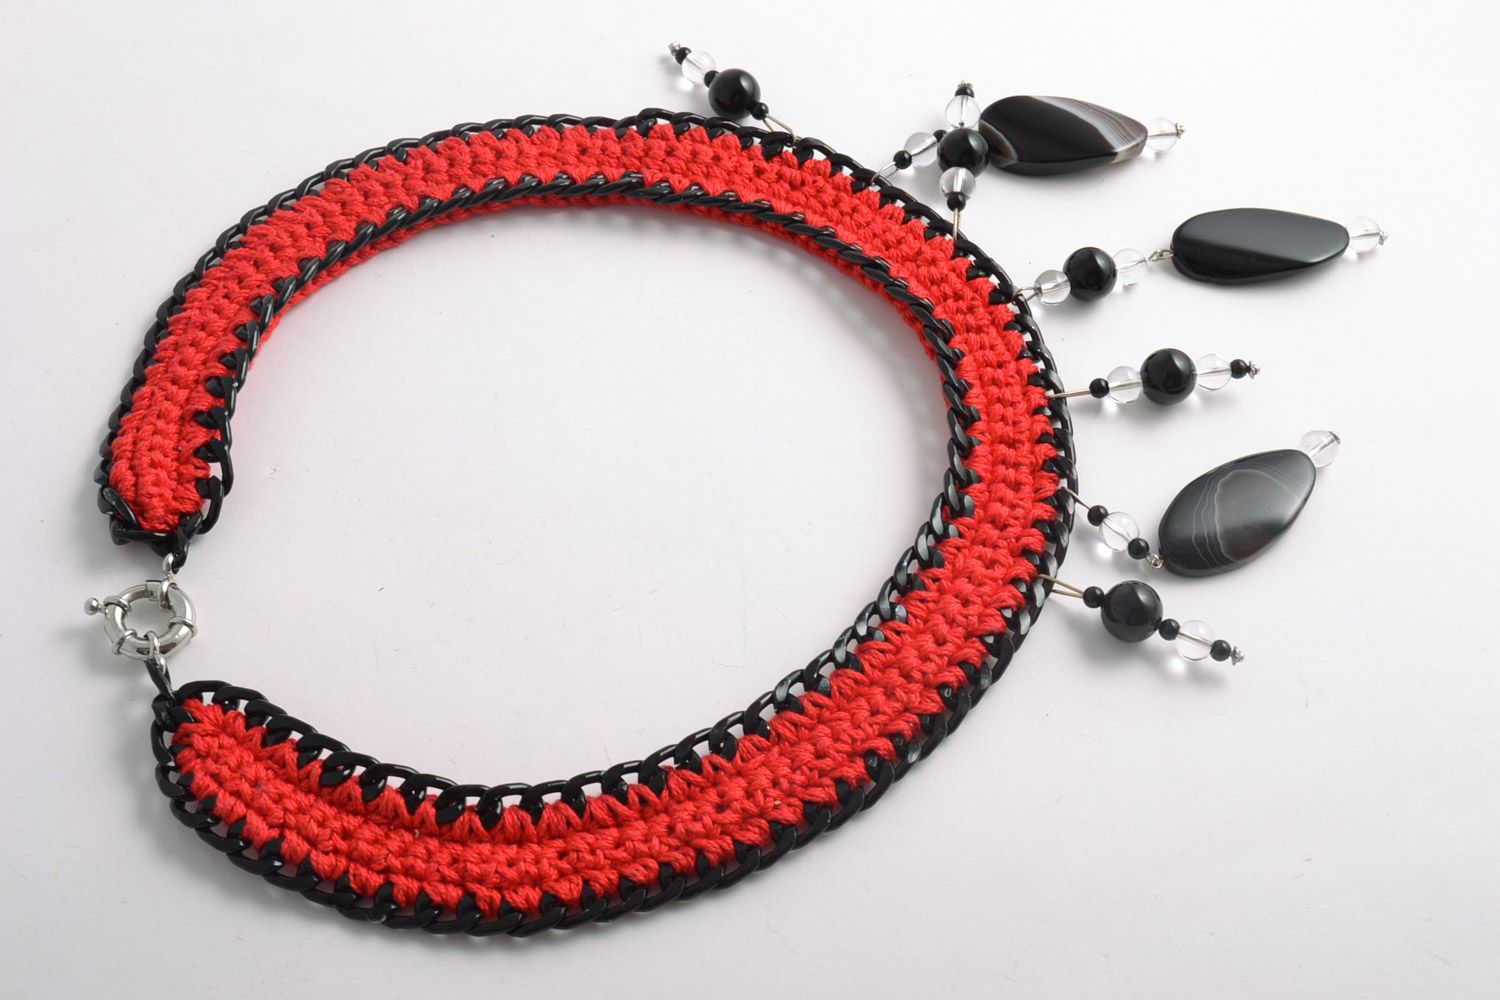 Strict handmade gemstone crochet necklace of red and black colors photo 4